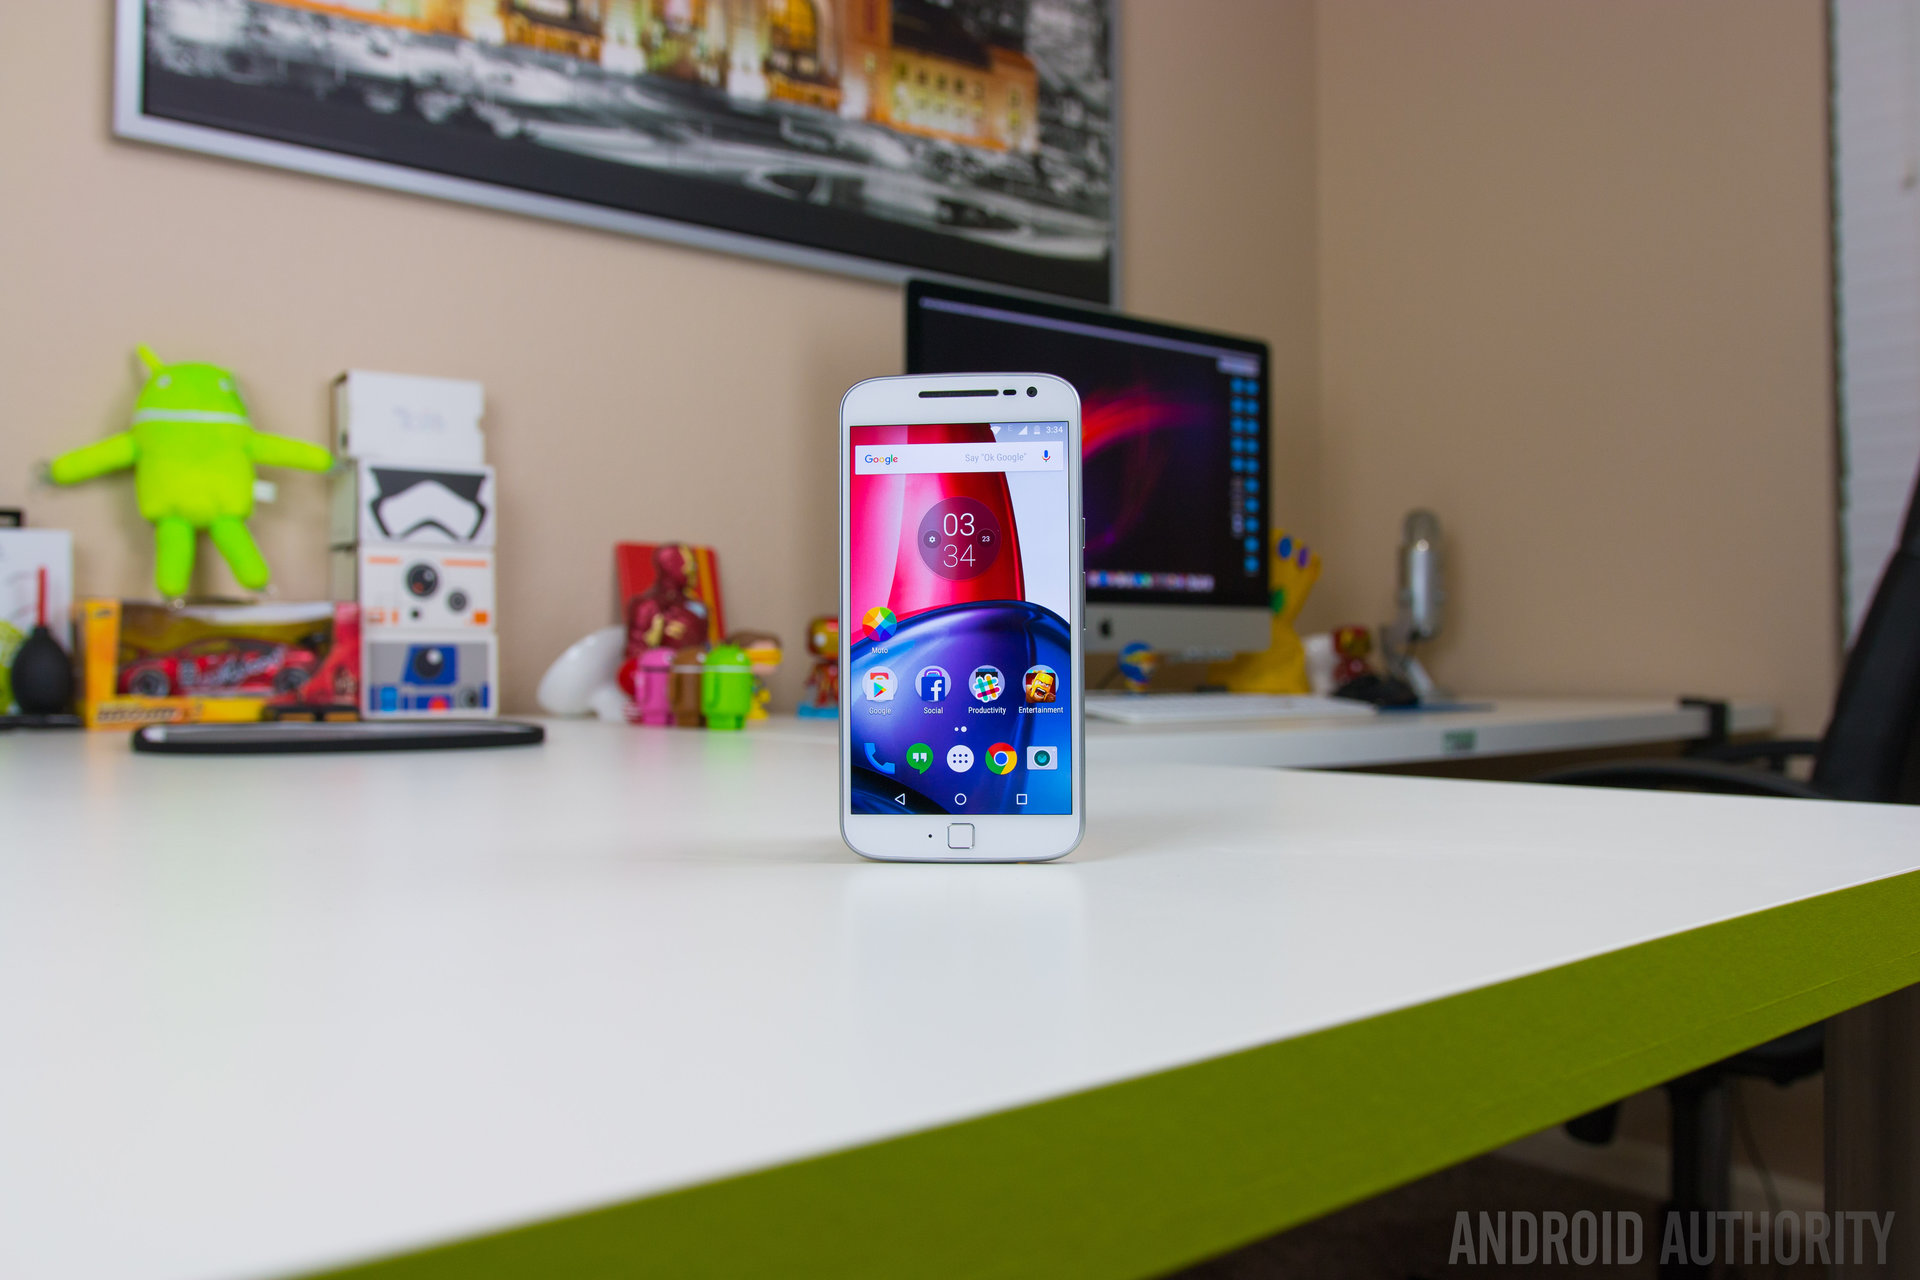 Moto G4 Plus Hands-on: The mid-range phone to watch - MobileSyrup